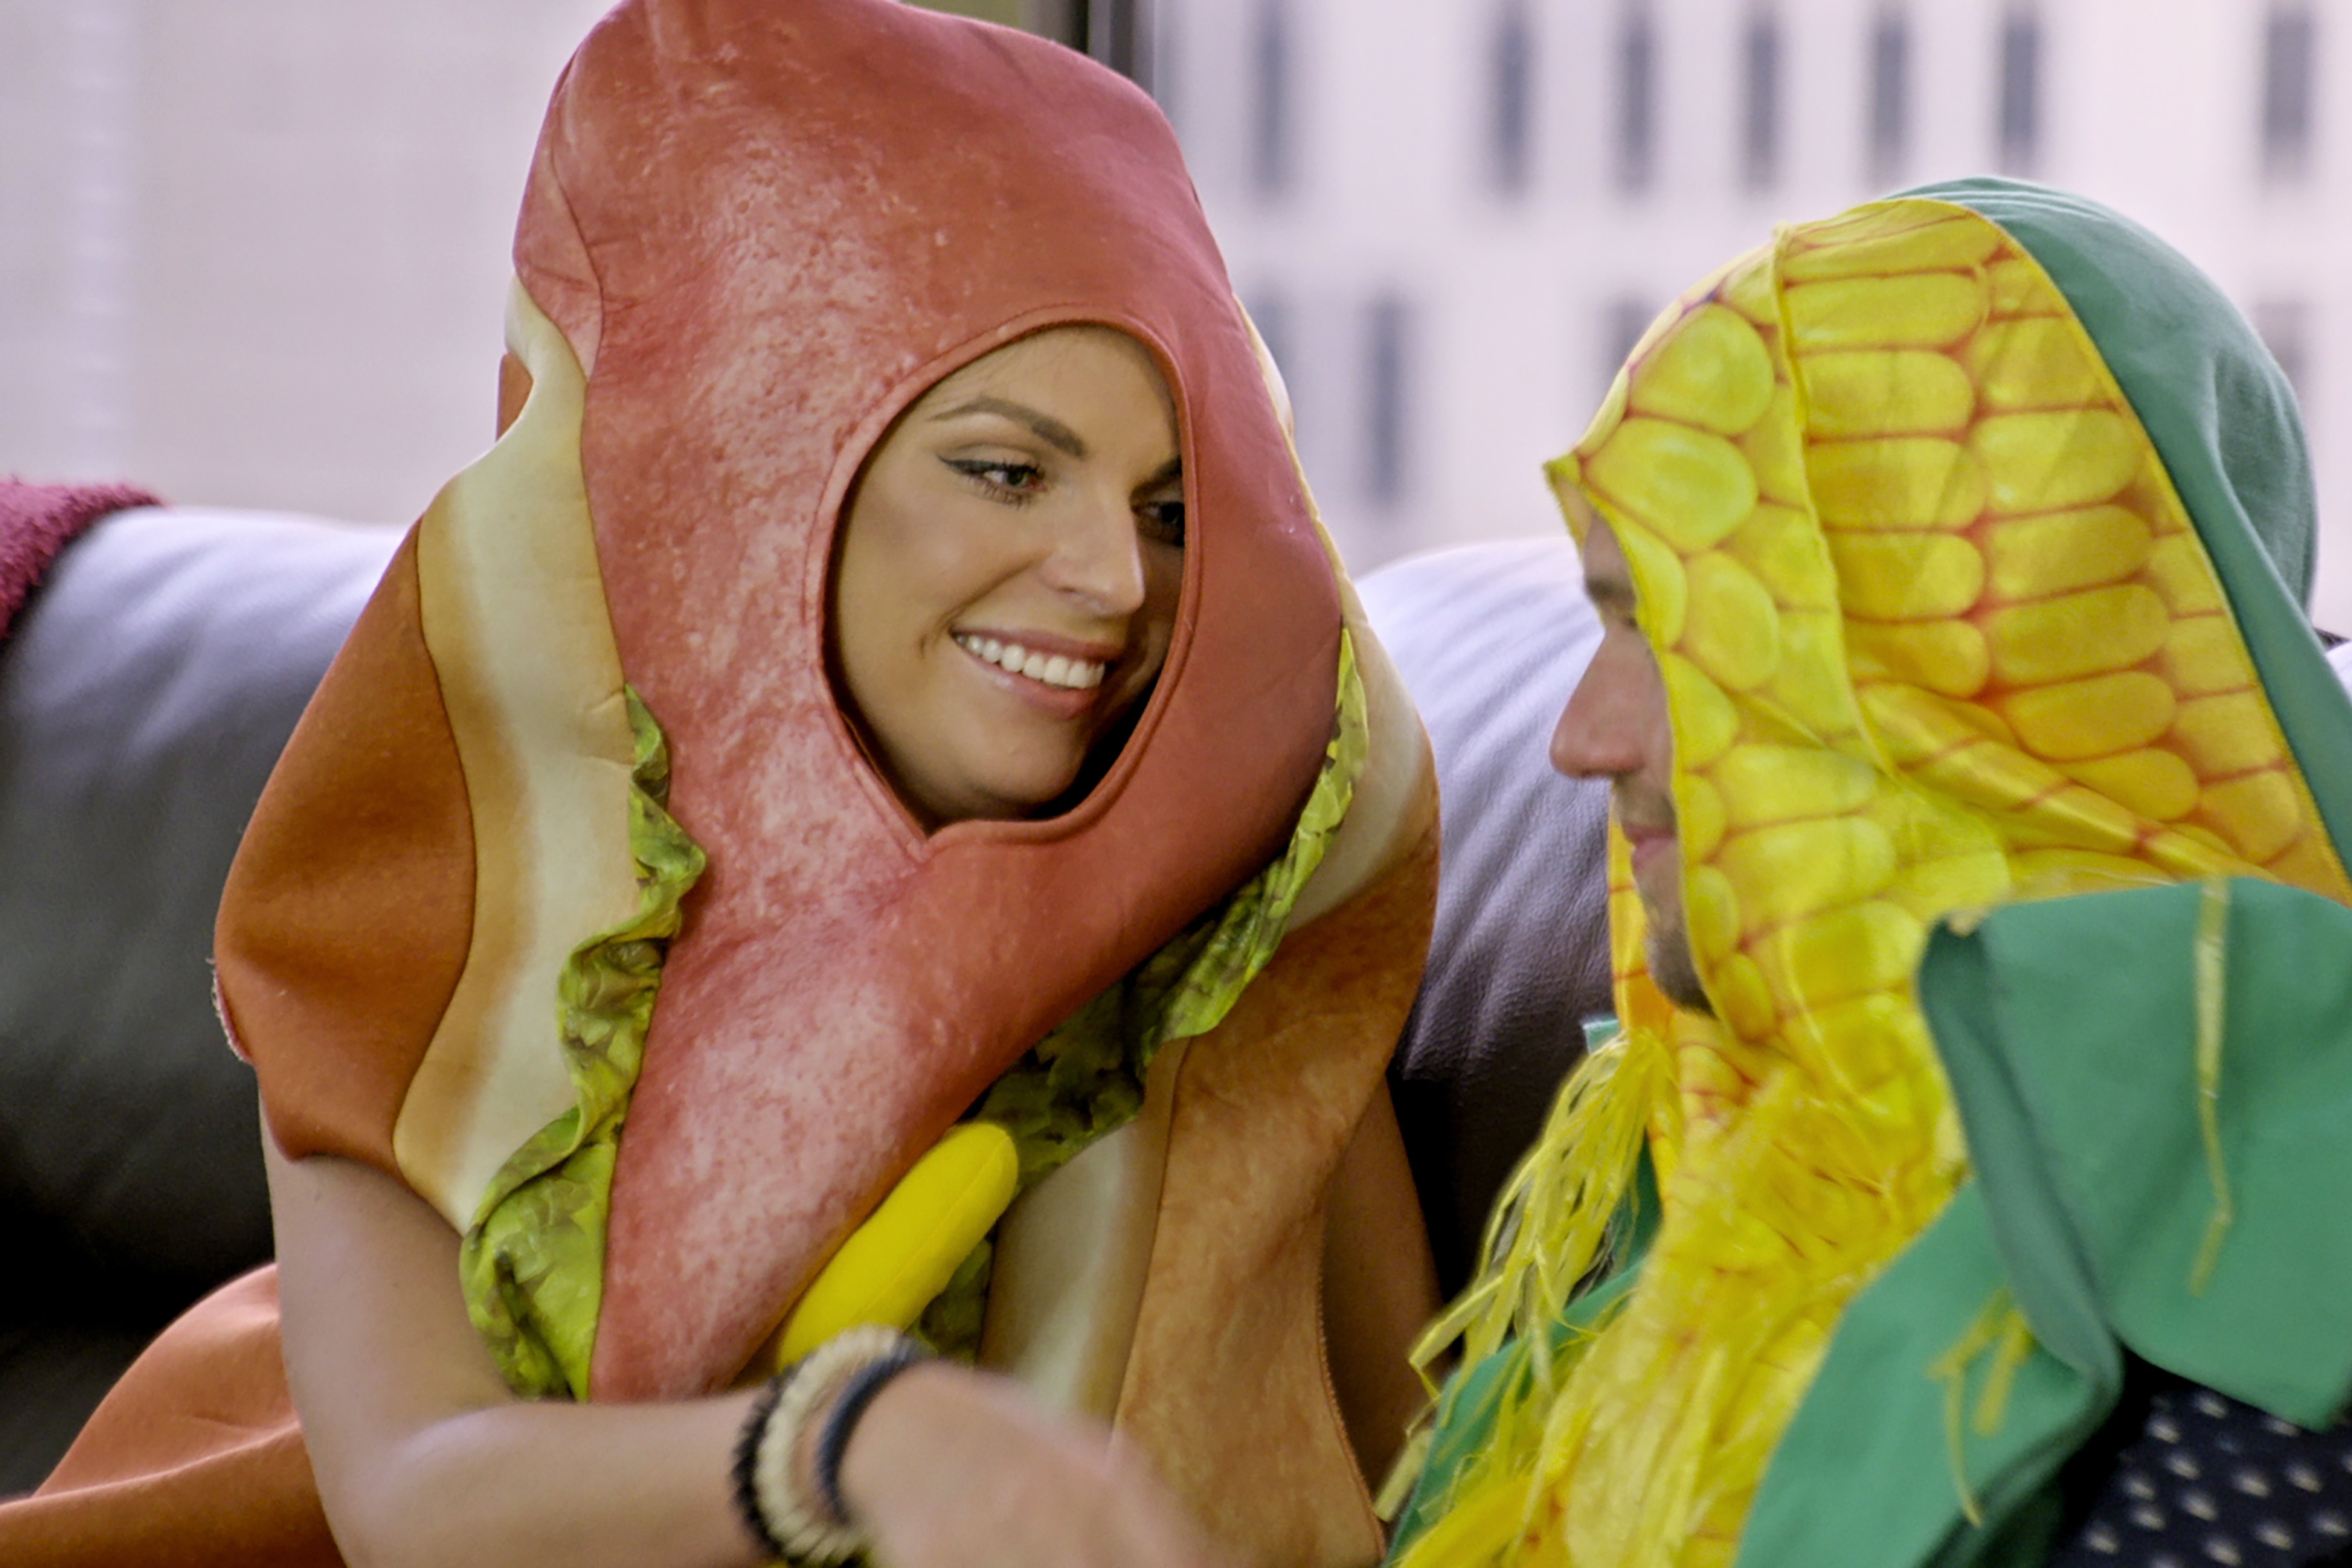 A woman wearing a hot dog costume and a man wearing an ear of corn costume.